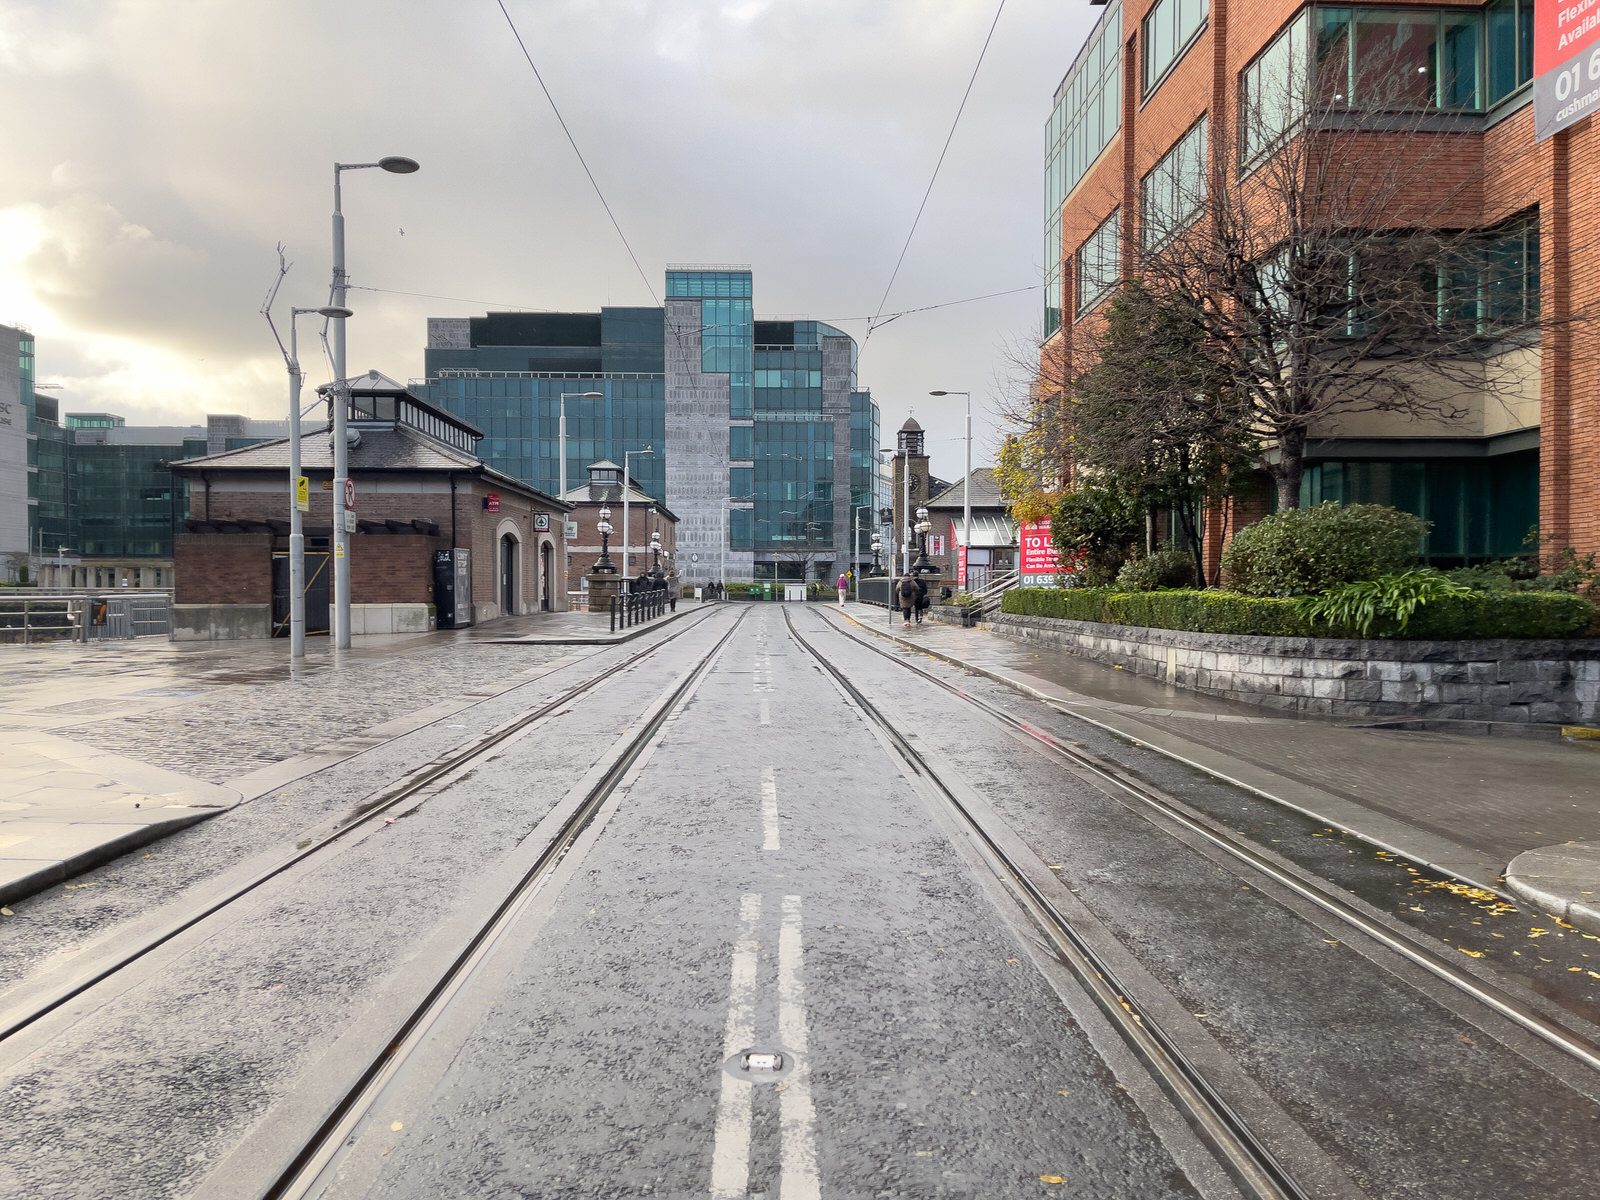 THE LUAS TRAM STOP AT GEORGE'S DOCK 005